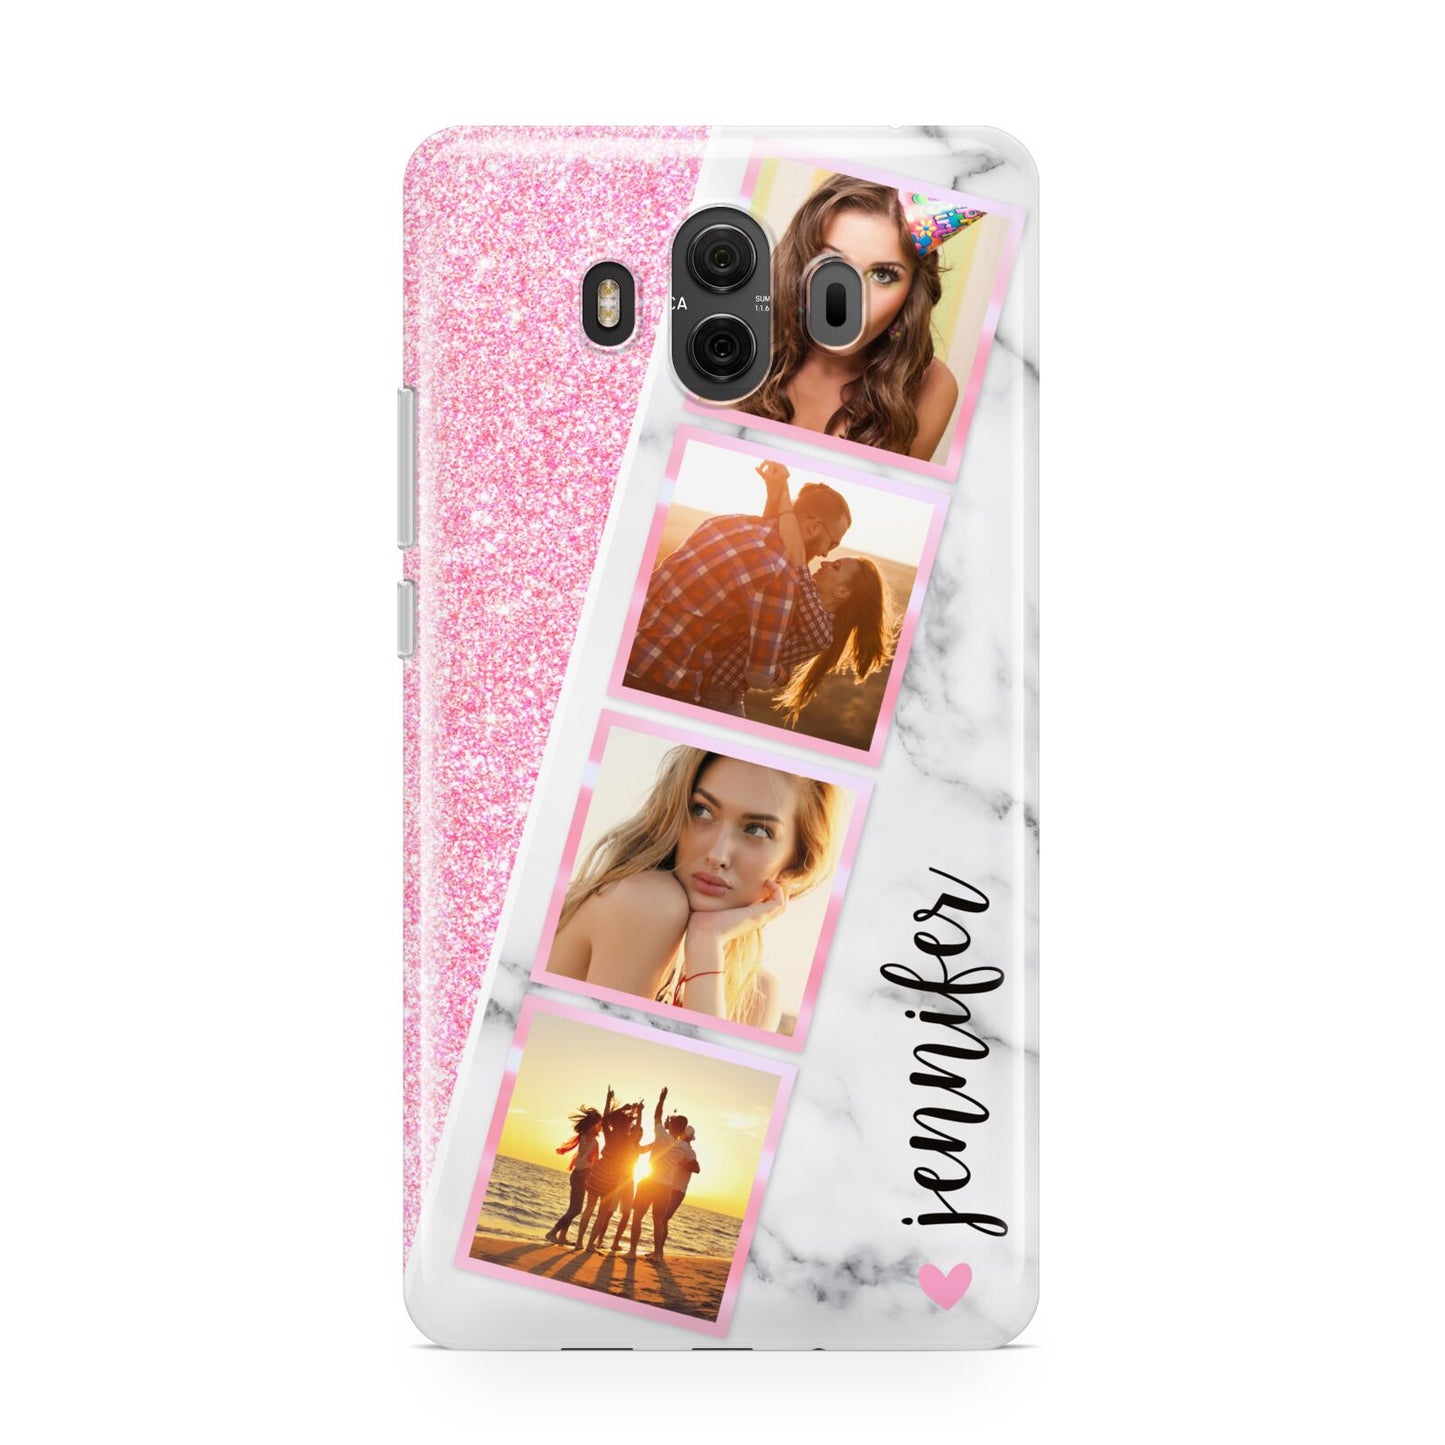 Personalised Pink Marble Photo Strip Huawei Mate 10 Protective Phone Case